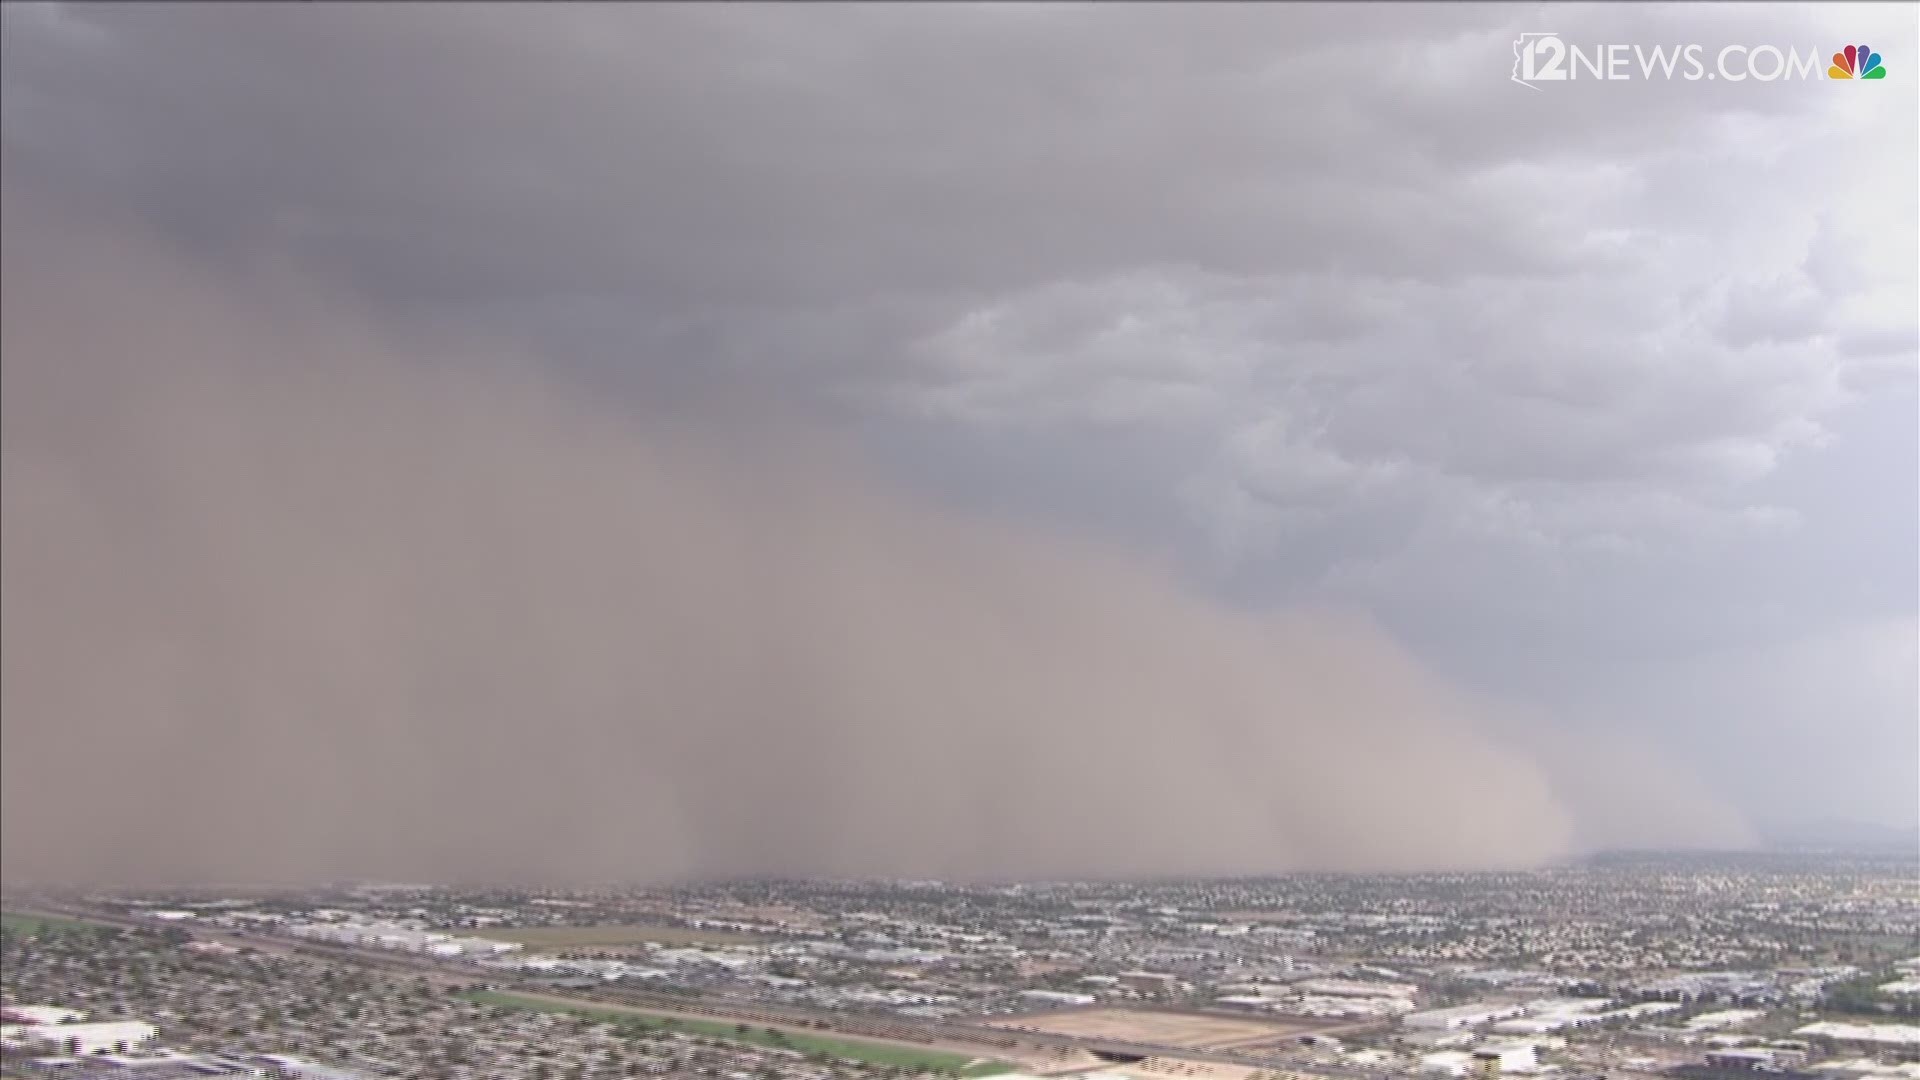 Watch time lapse footage of a dust storm moving into the Southeast Valley.